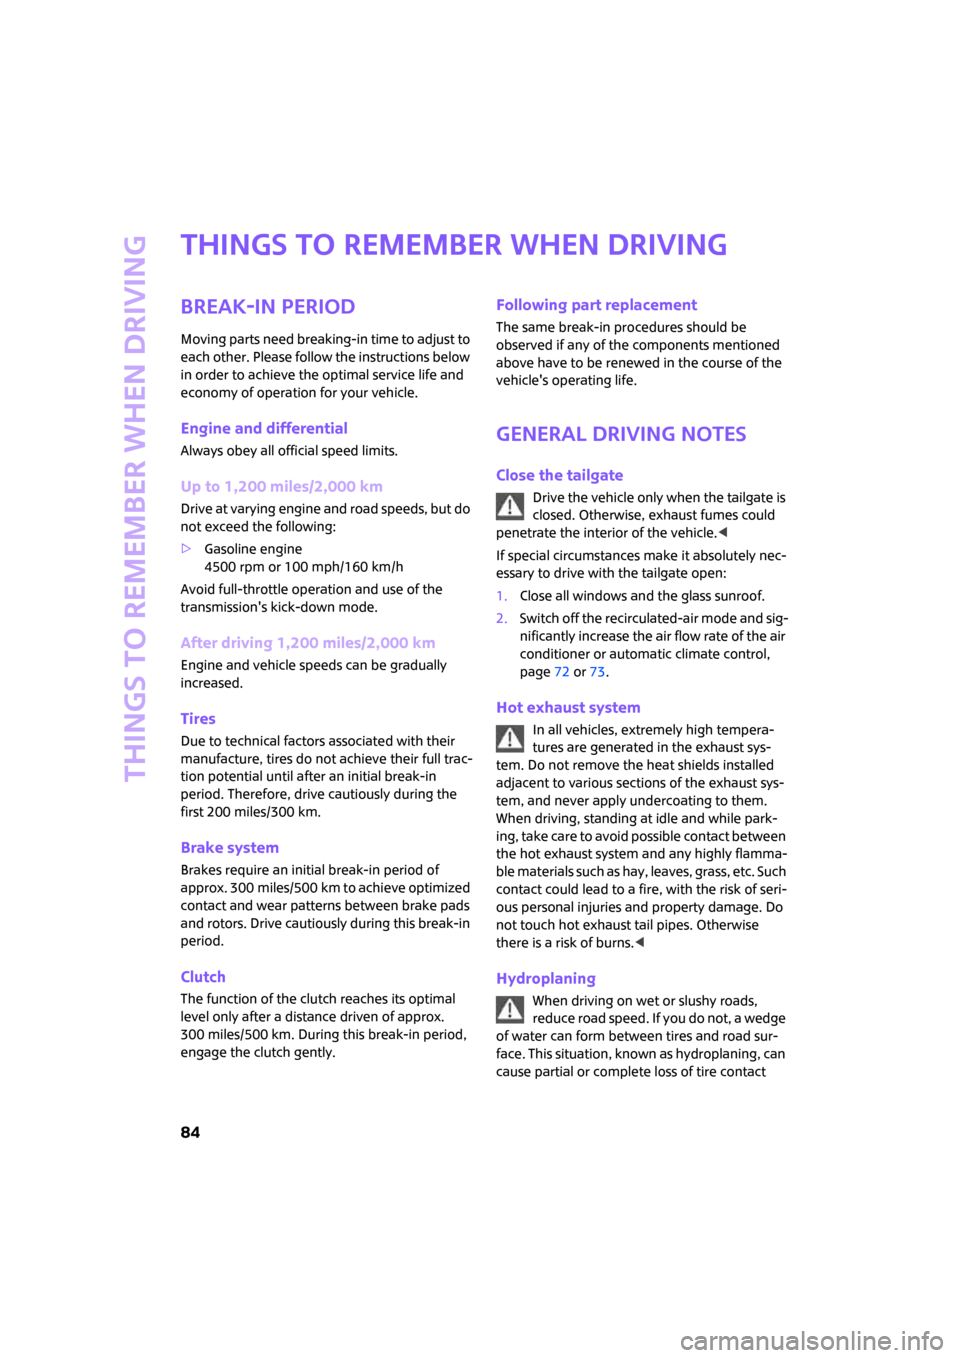 MINI Clubman 2008  Owners Manual Things to remember when driving
84
Things to remember when driving
Break-in period
Moving parts need breaking-in time to adjust to 
each other. Please follow the instructions below 
in order to achiev